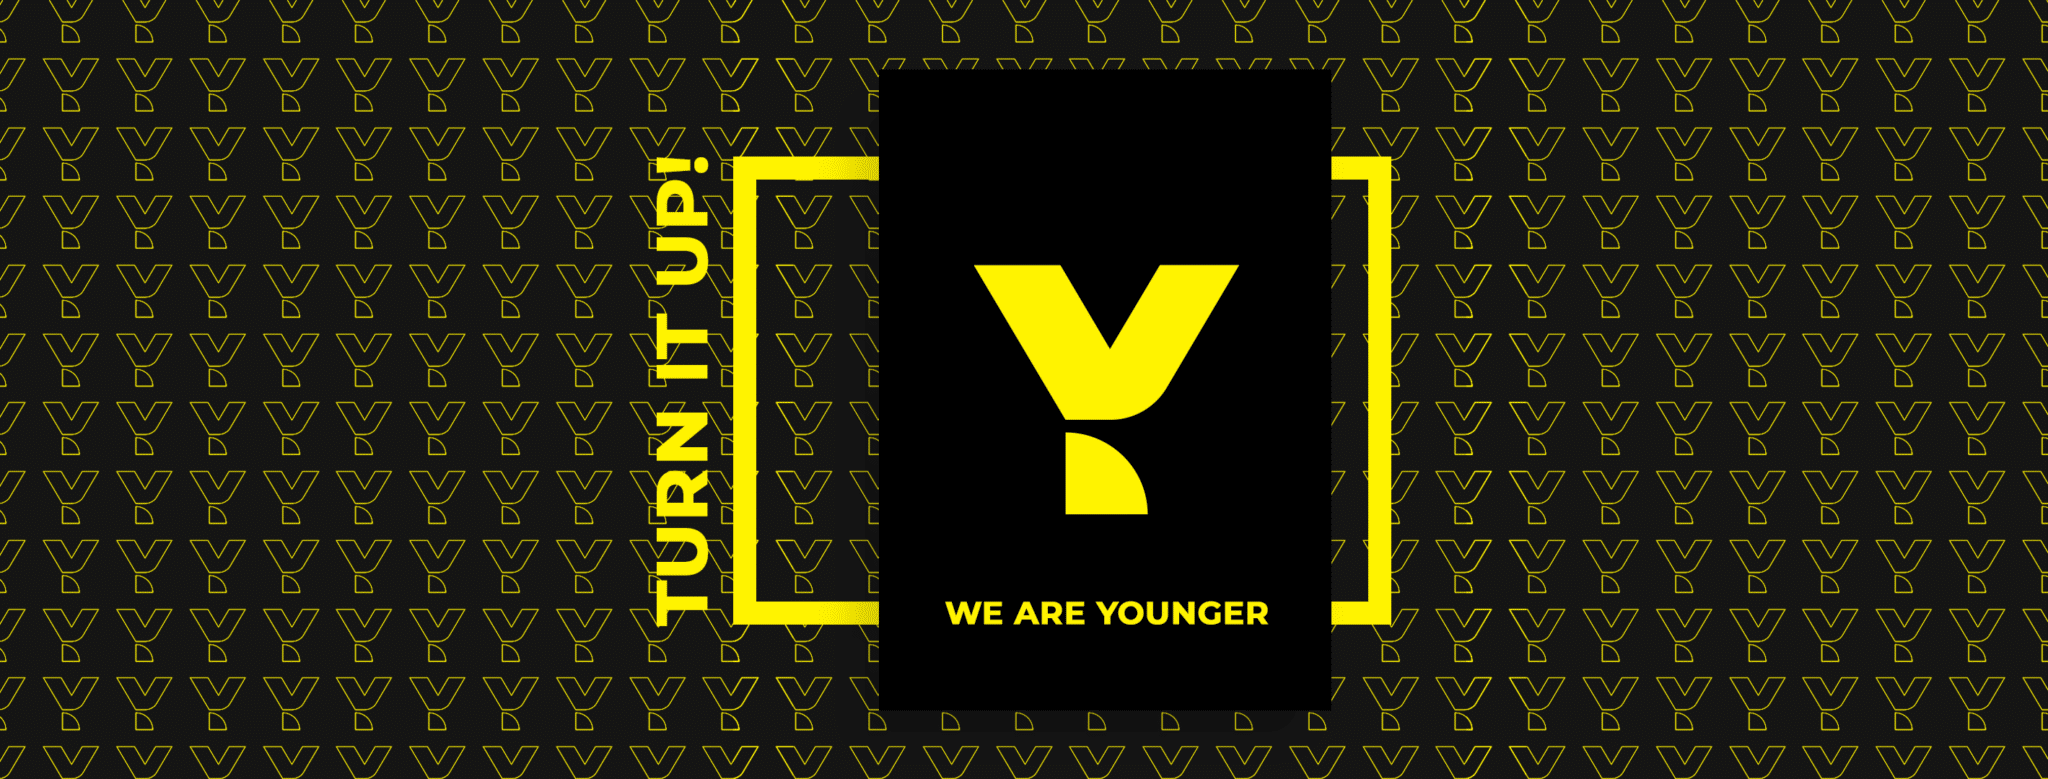 We Are Younger